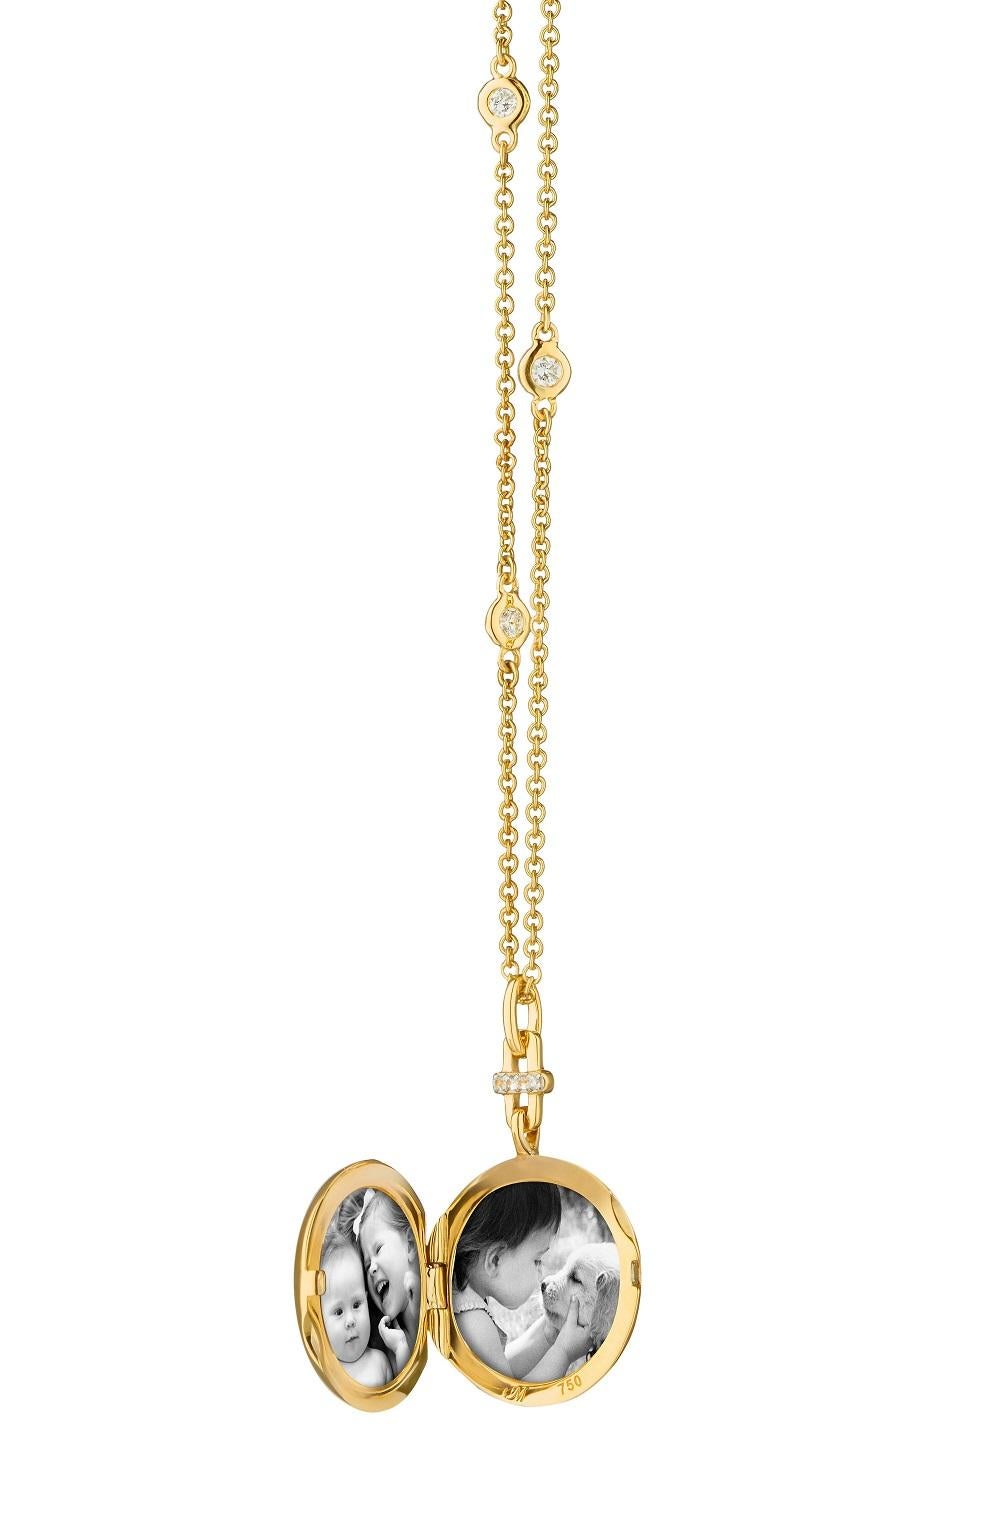 Give your look style with this Monica Rich Kosann round twinkle star locket in 18k yellow gold. This locket features a center star set with a diamond, decorative diamond bail and stunning 17